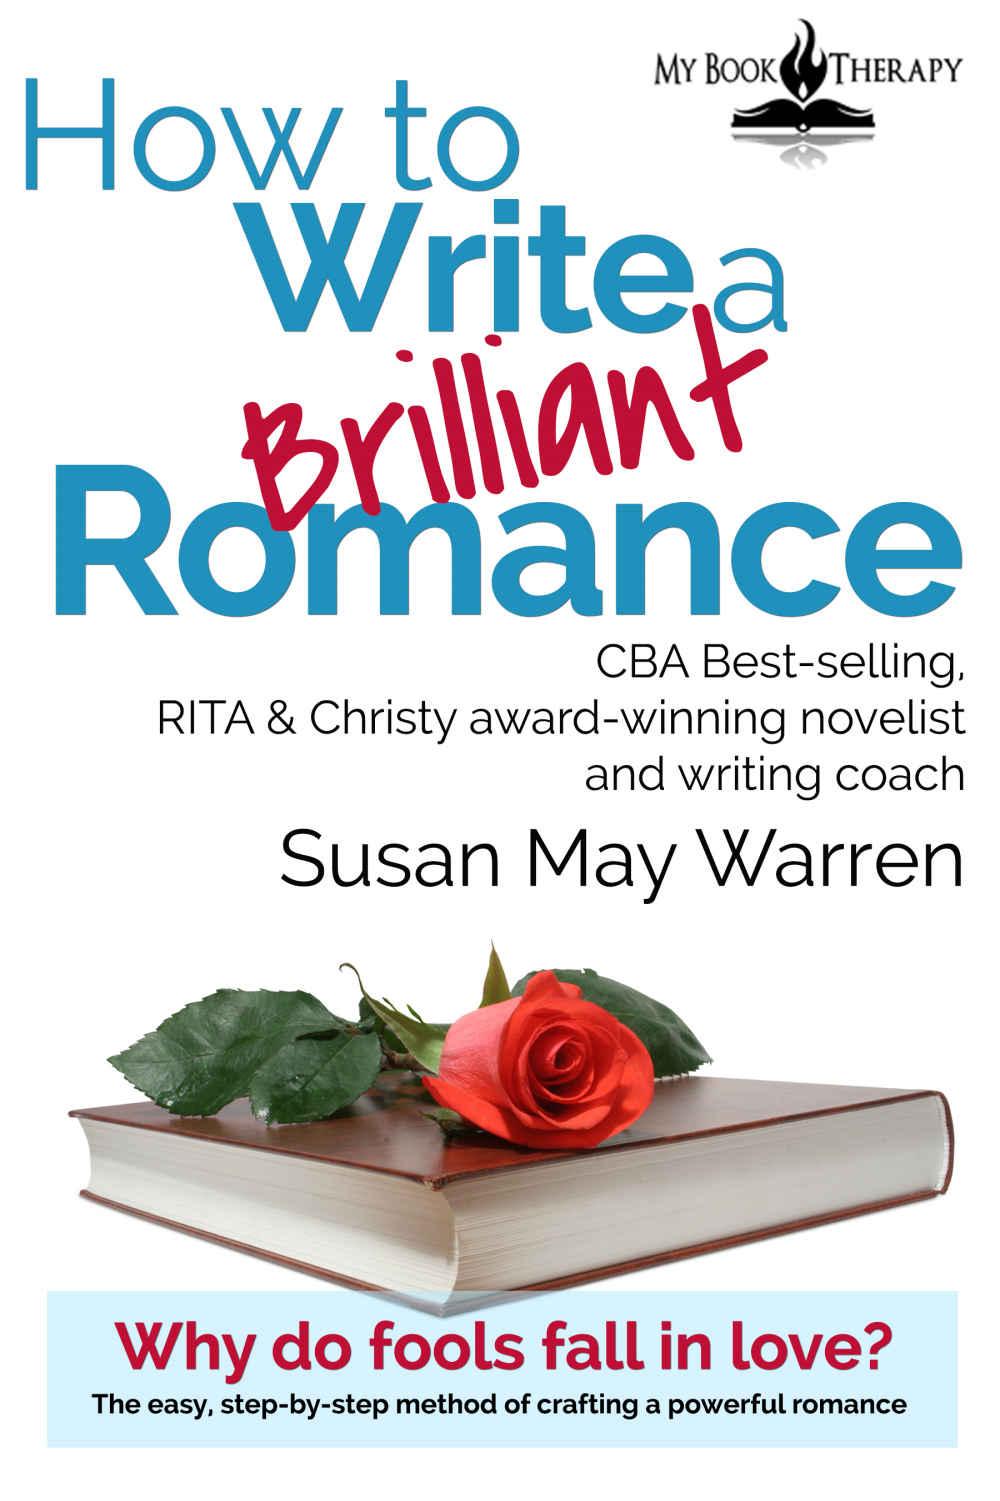 How to Write a Brilliant Romance: The Easy, Step-By-Step Method of Crafting a Powerful Romance (Go! Write Something Brilliant) by Susan May Warren